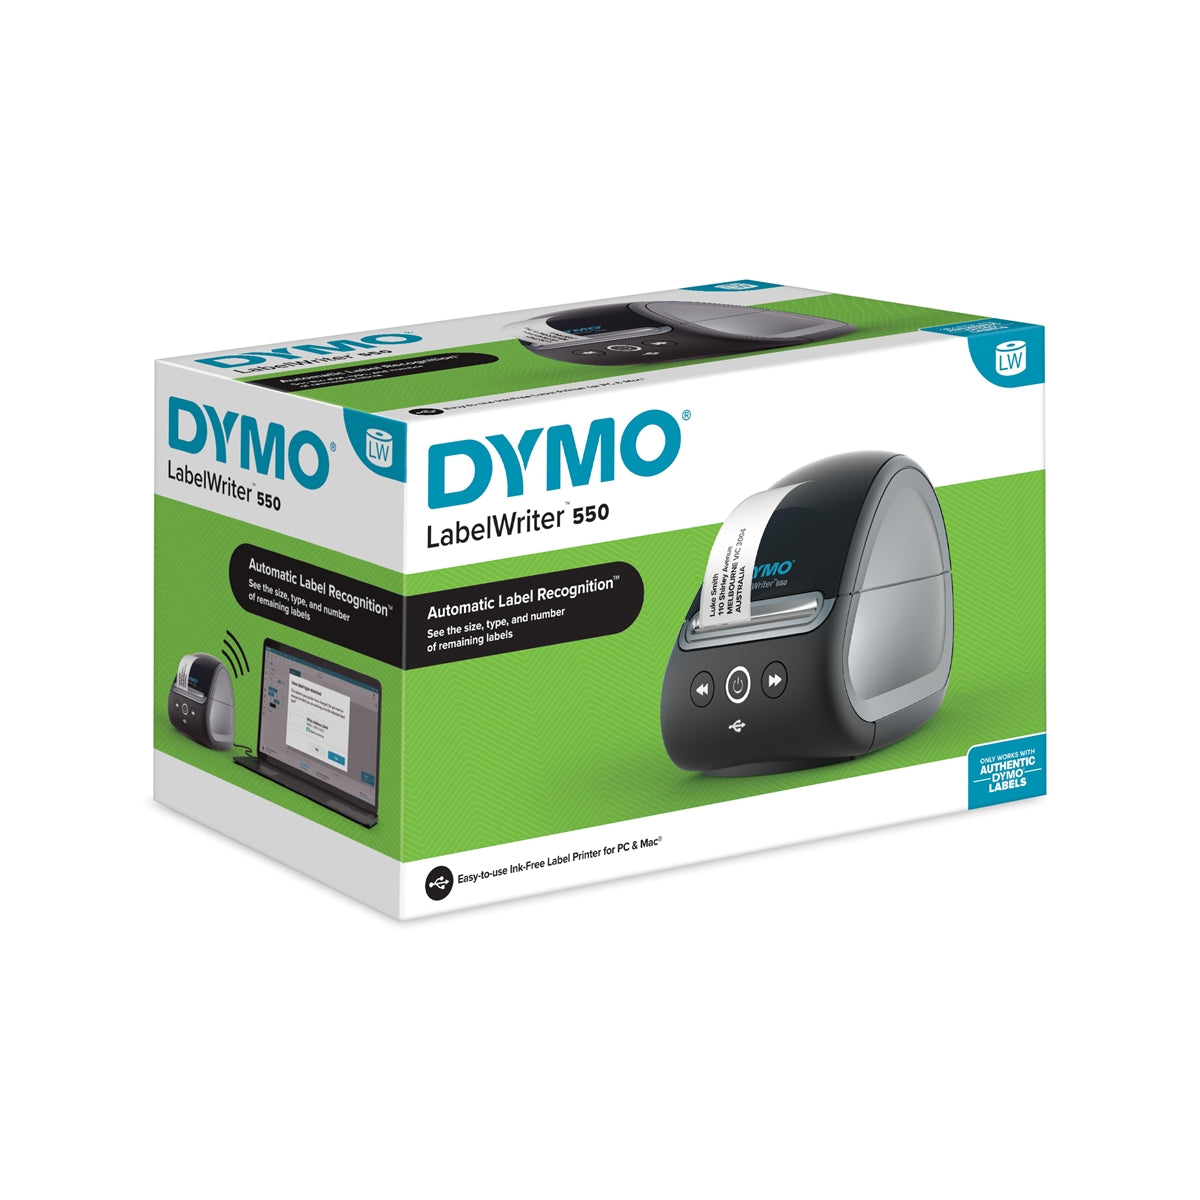 DYMO® : Label Makers & Printers, Labels, and More!